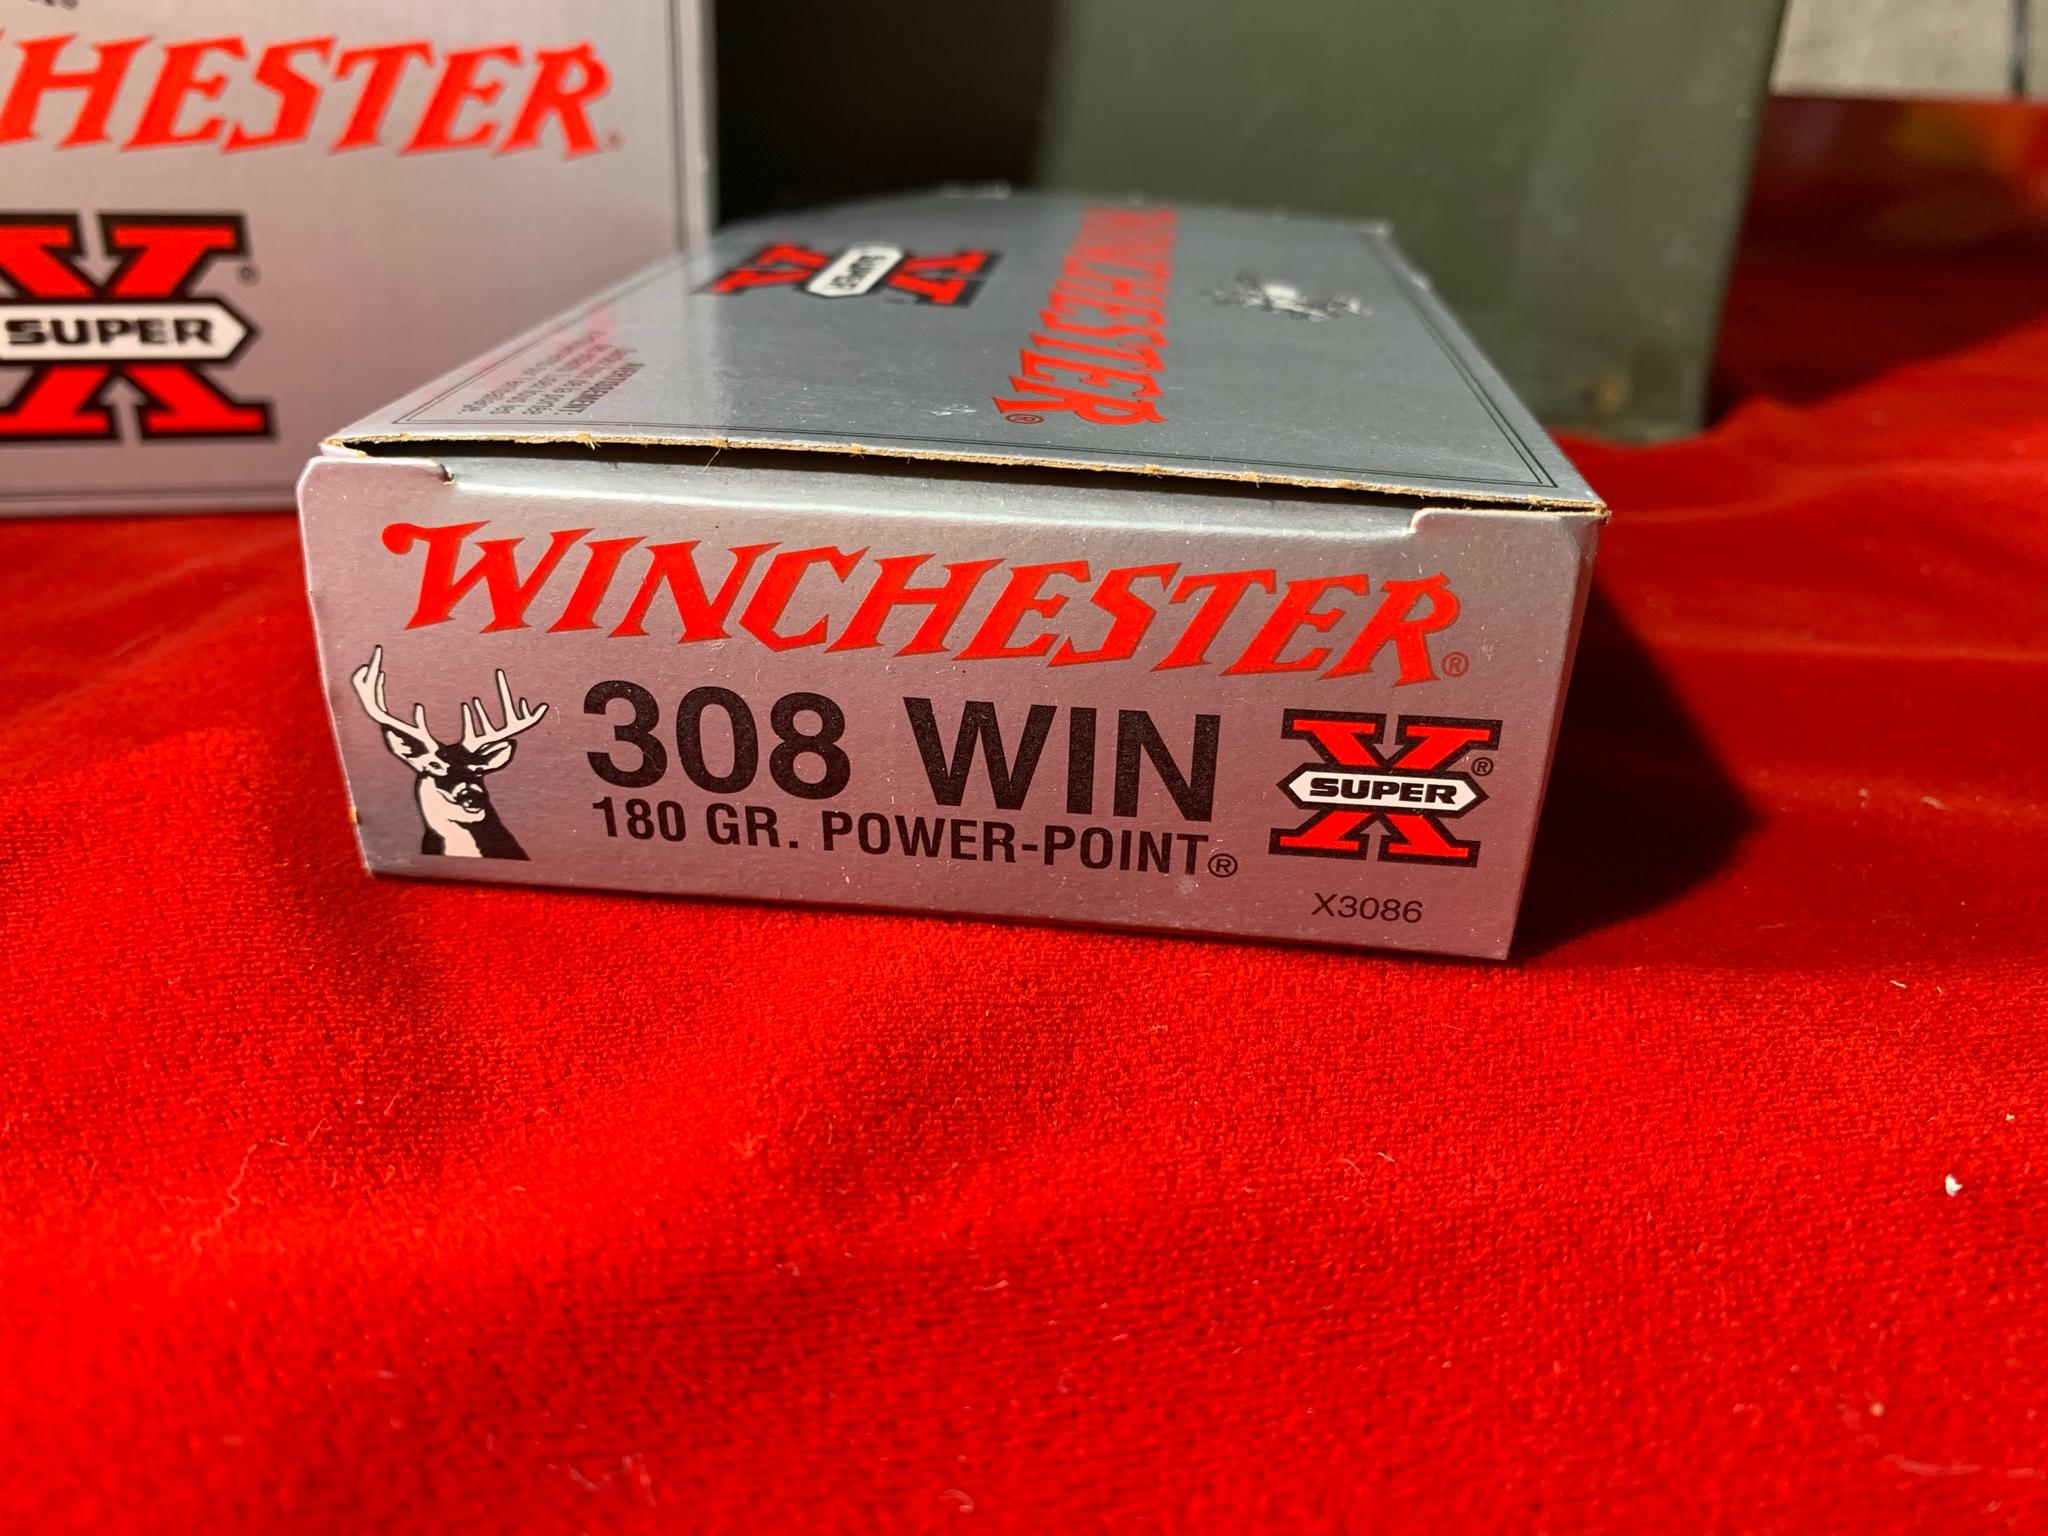 4 Boxes of Winchester 308 WIN 180 Grain. Power-Point Ammunition with Ammo Case